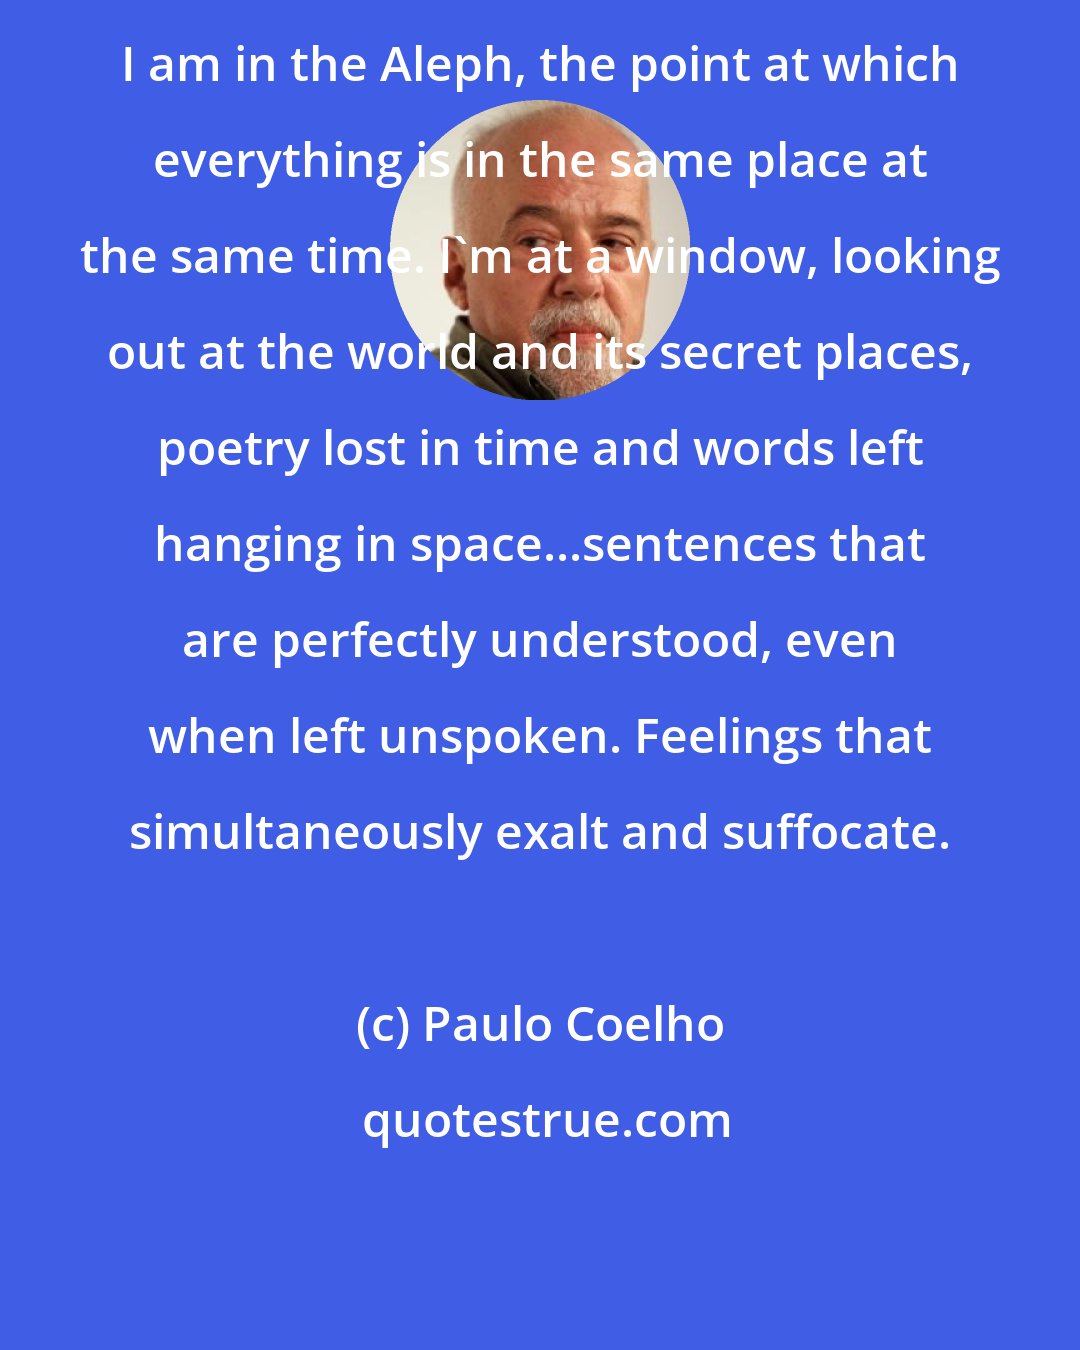 Paulo Coelho: I am in the Aleph, the point at which everything is in the same place at the same time. I'm at a window, looking out at the world and its secret places, poetry lost in time and words left hanging in space...sentences that are perfectly understood, even when left unspoken. Feelings that simultaneously exalt and suffocate.